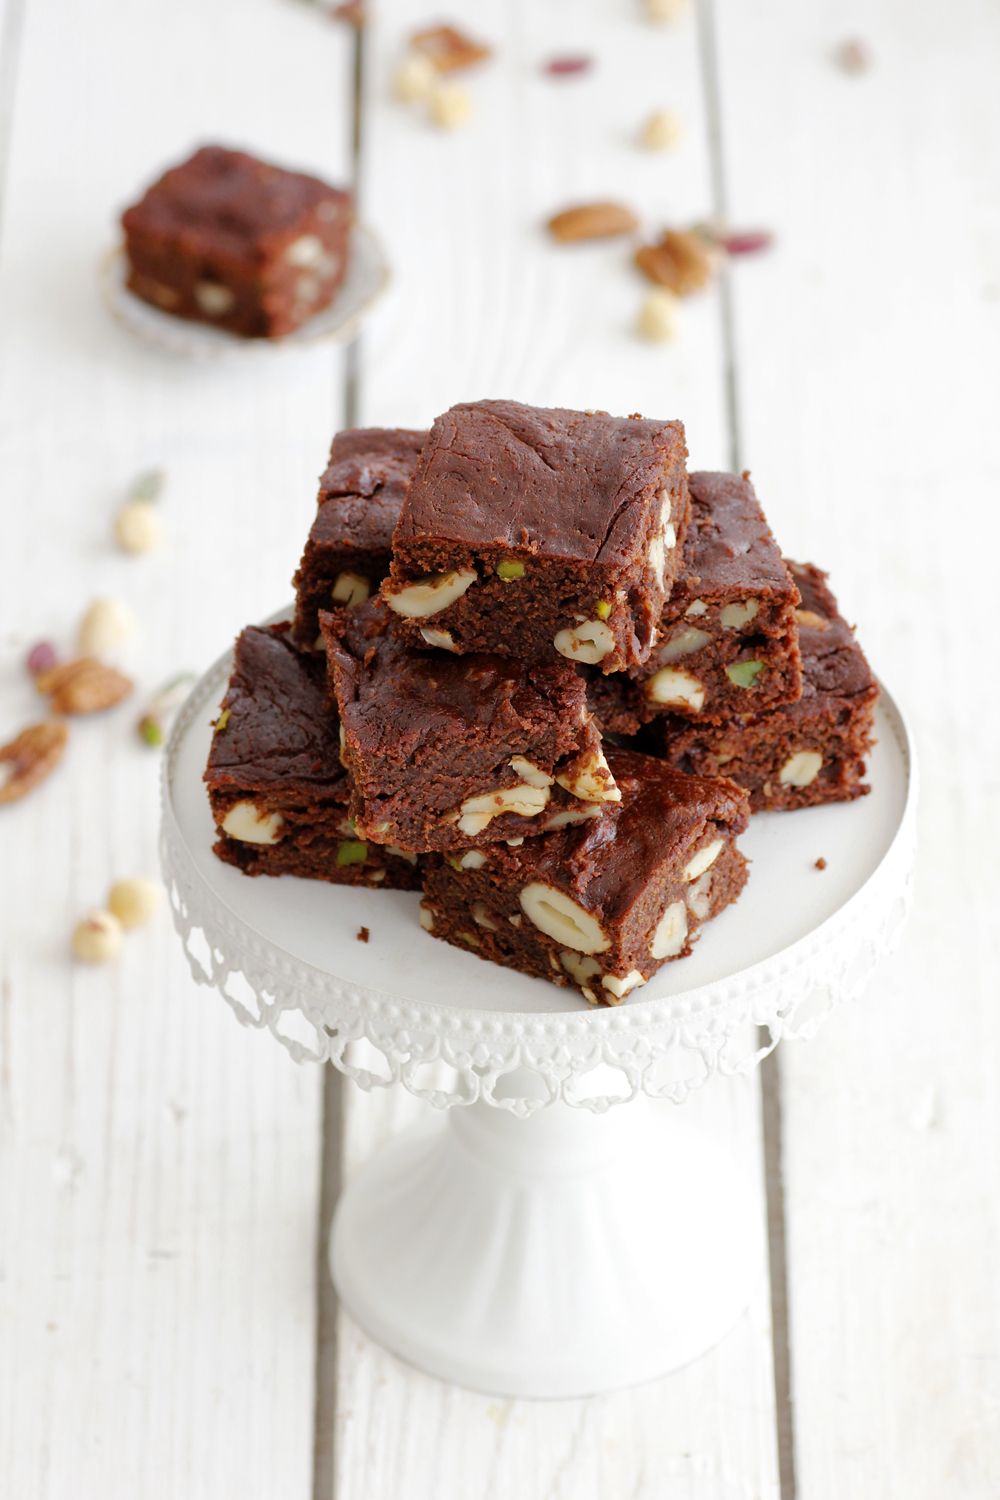 Gluten Free Honey Chocolate Brownies with Nuts